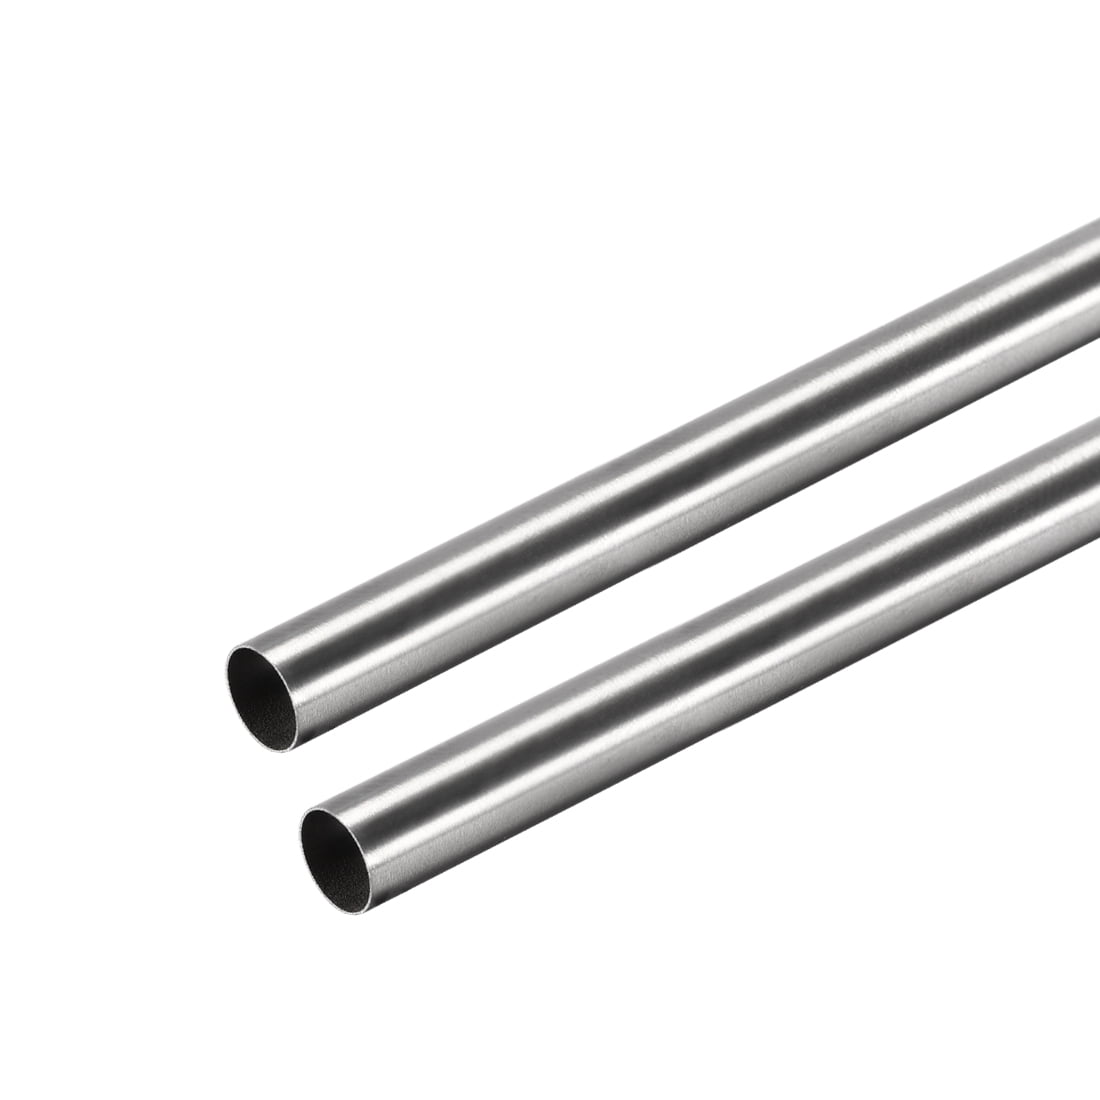 304 Stainless Steel Round Tubing 9mm OD 0.2mm Wall Thickness 250mm Length 4 Pcs 